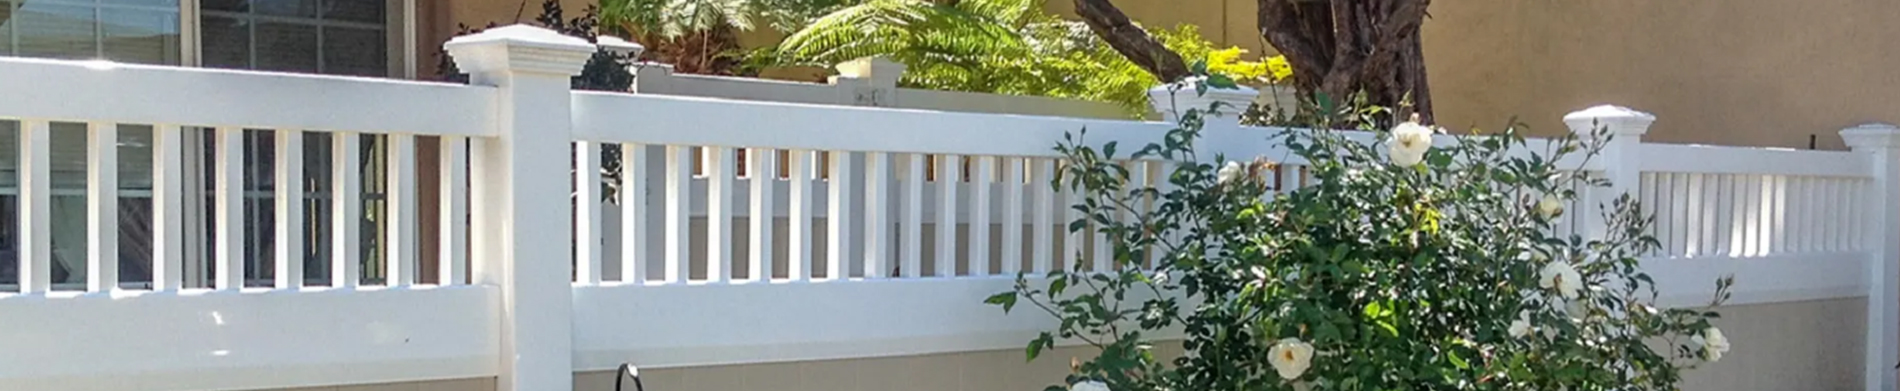 Benefits of Getting Vinyl Fencing at Your Home